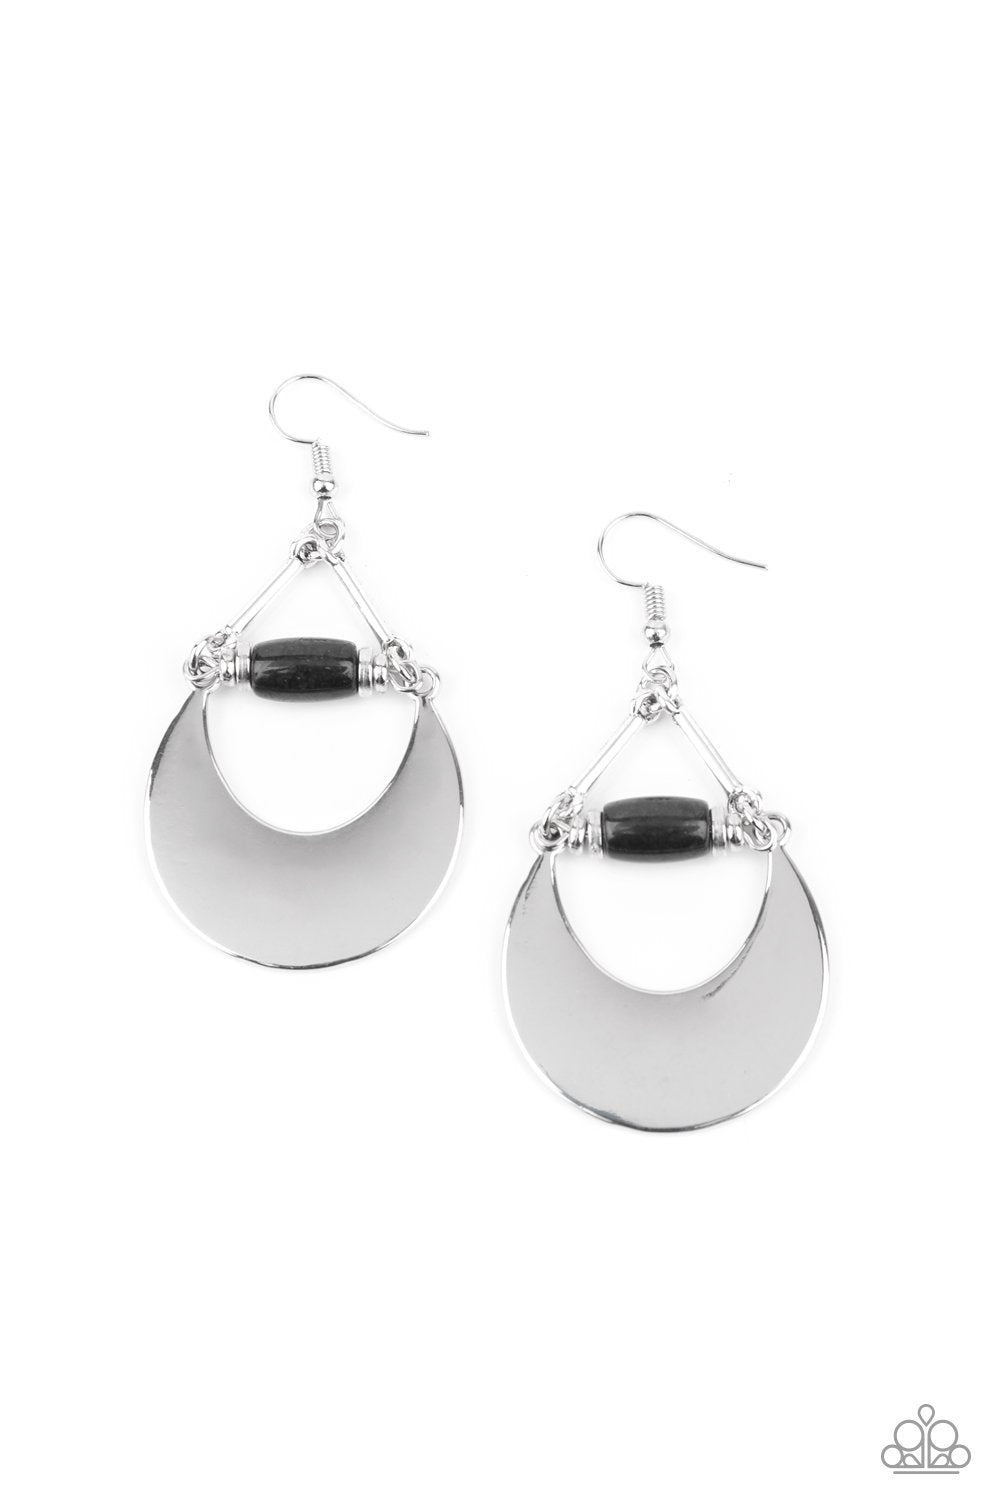 Mystical Moonbeams Black Stone and Silver Earrings - Paparazzi Accessories - lightbox -CarasShop.com - $5 Jewelry by Cara Jewels